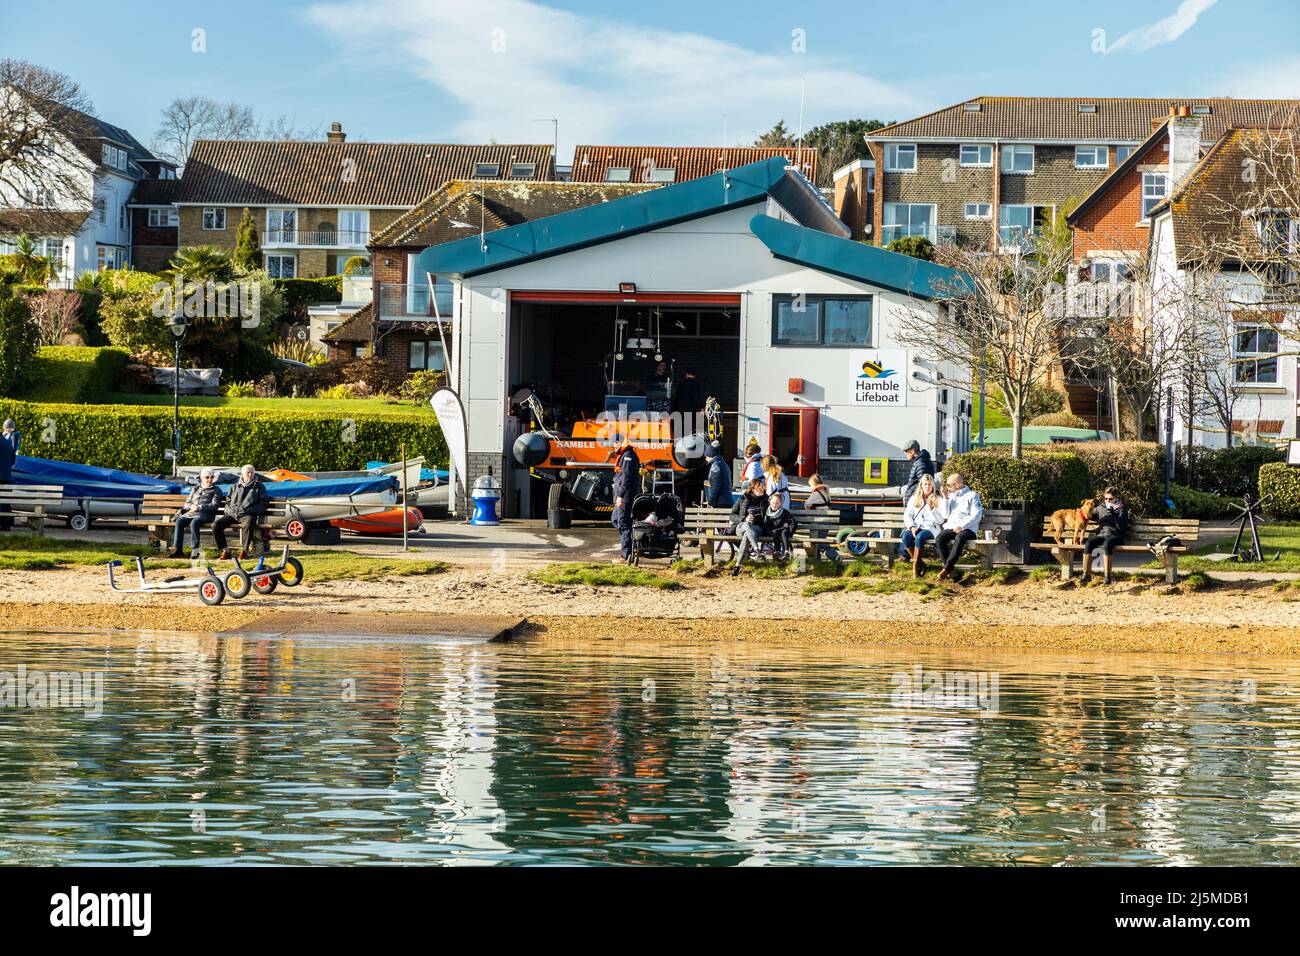 Landscape of Hamble lifeboat station on a sunny spring afternoon, people enjoying the view of the River Hamble, Hamble-le-Rice  Hampshire, England UK Stock Photo